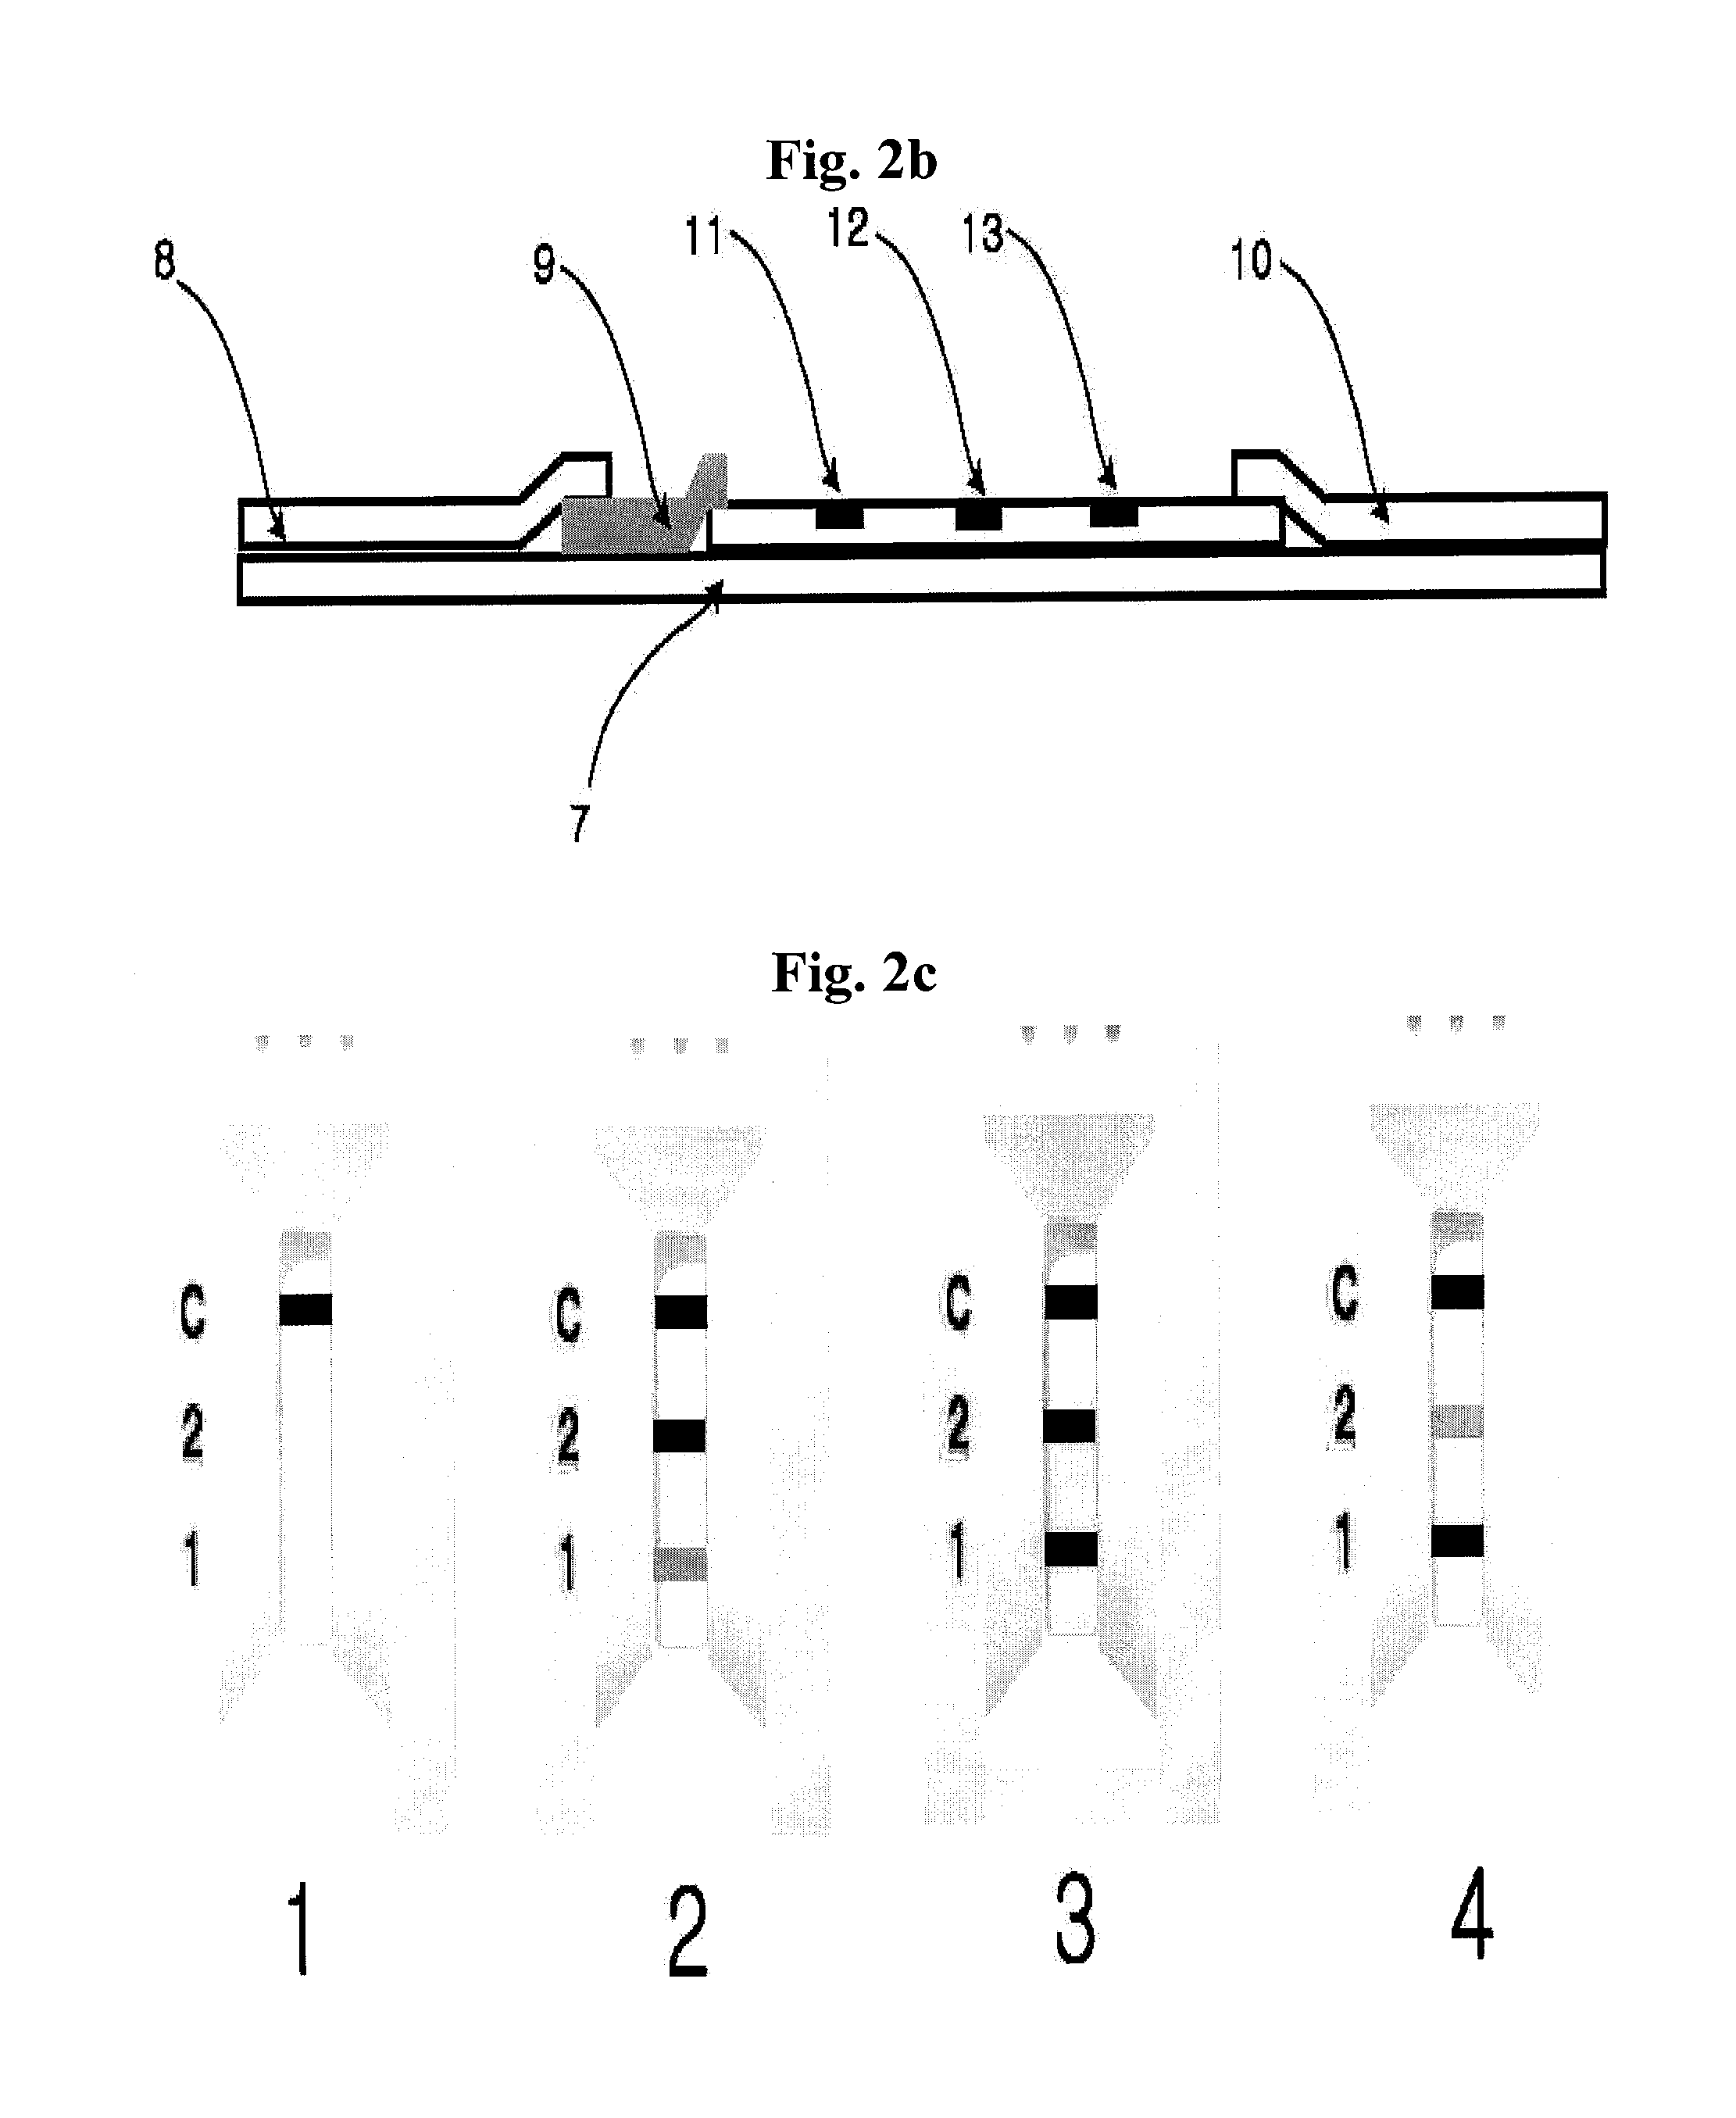 Diagnose device for measuring the ratio of proteins with similar structure